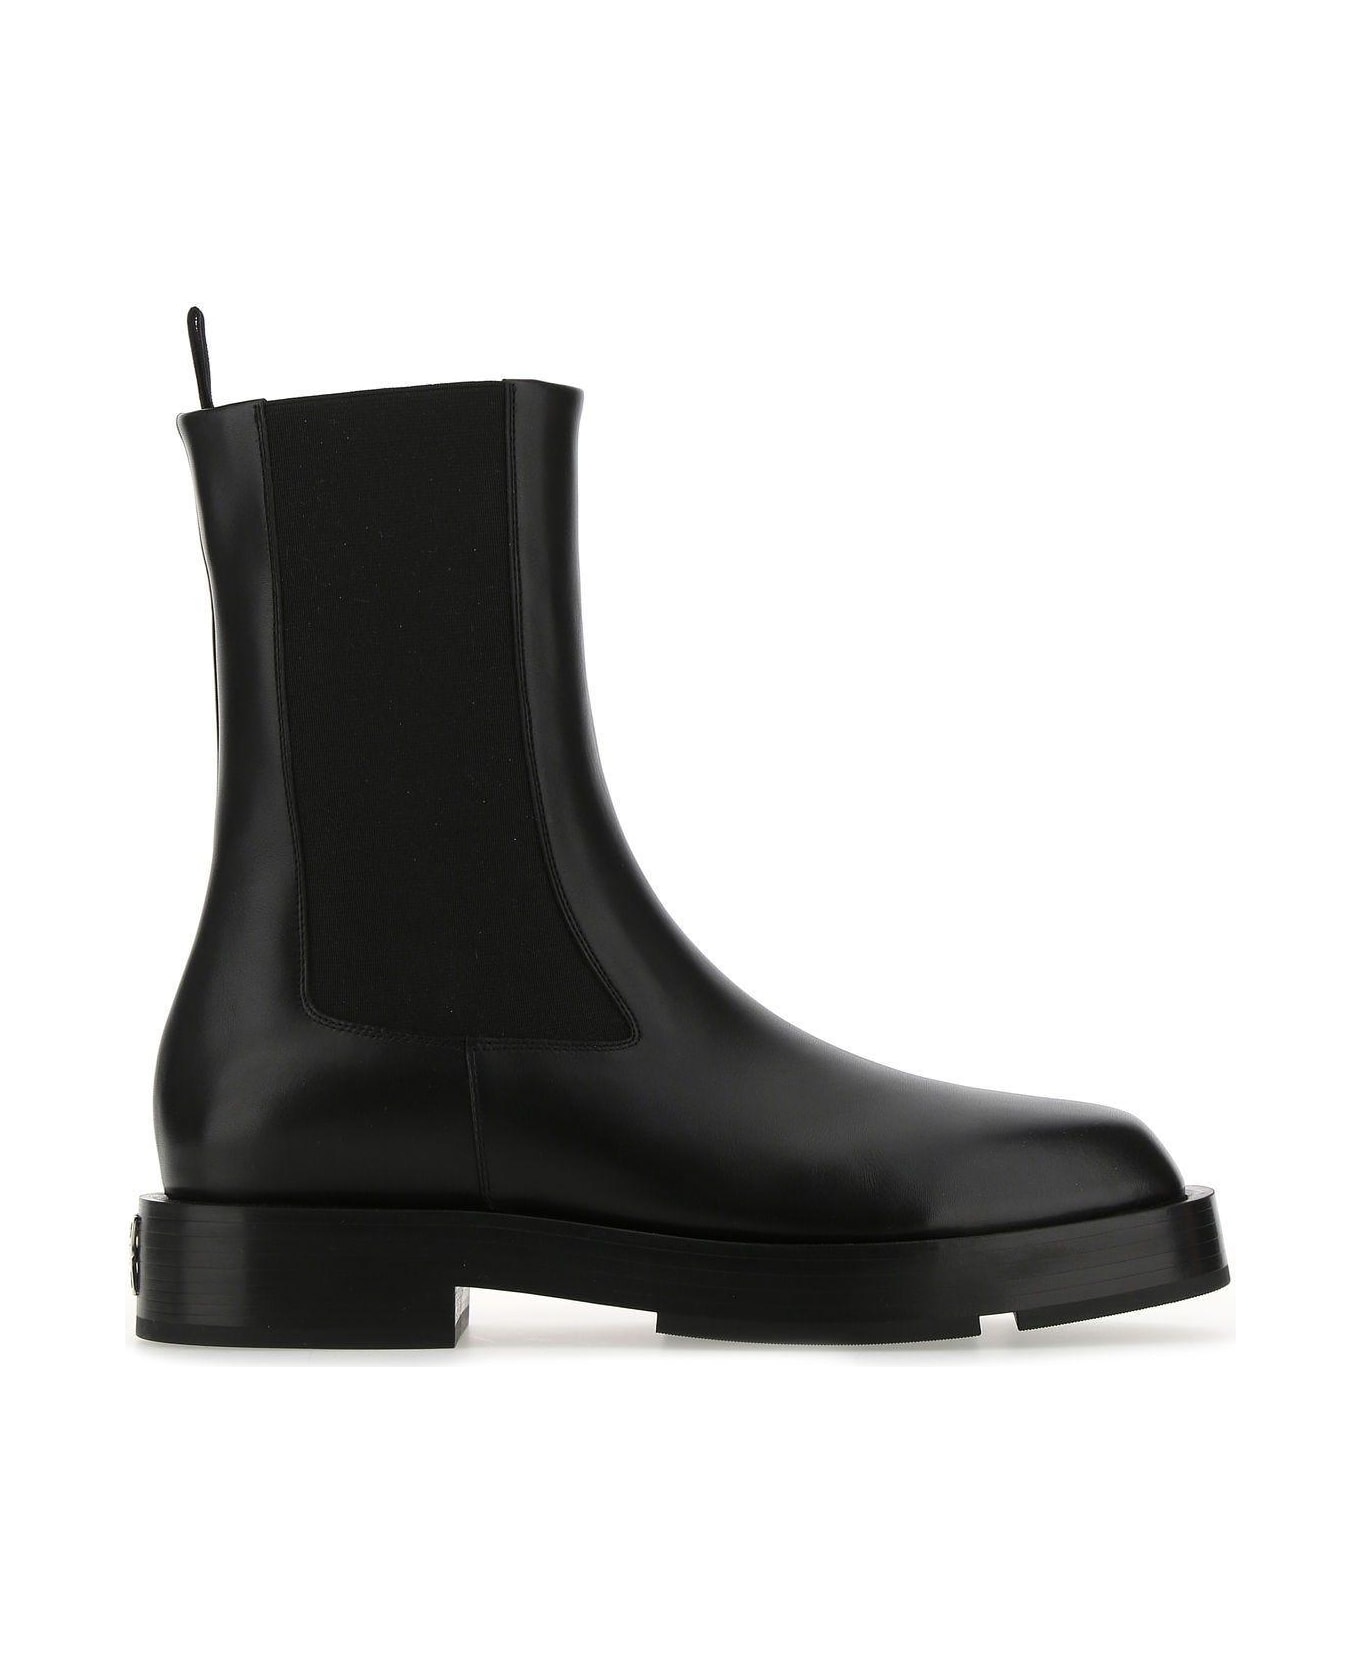 Givenchy Black Leather Boots - BLACK